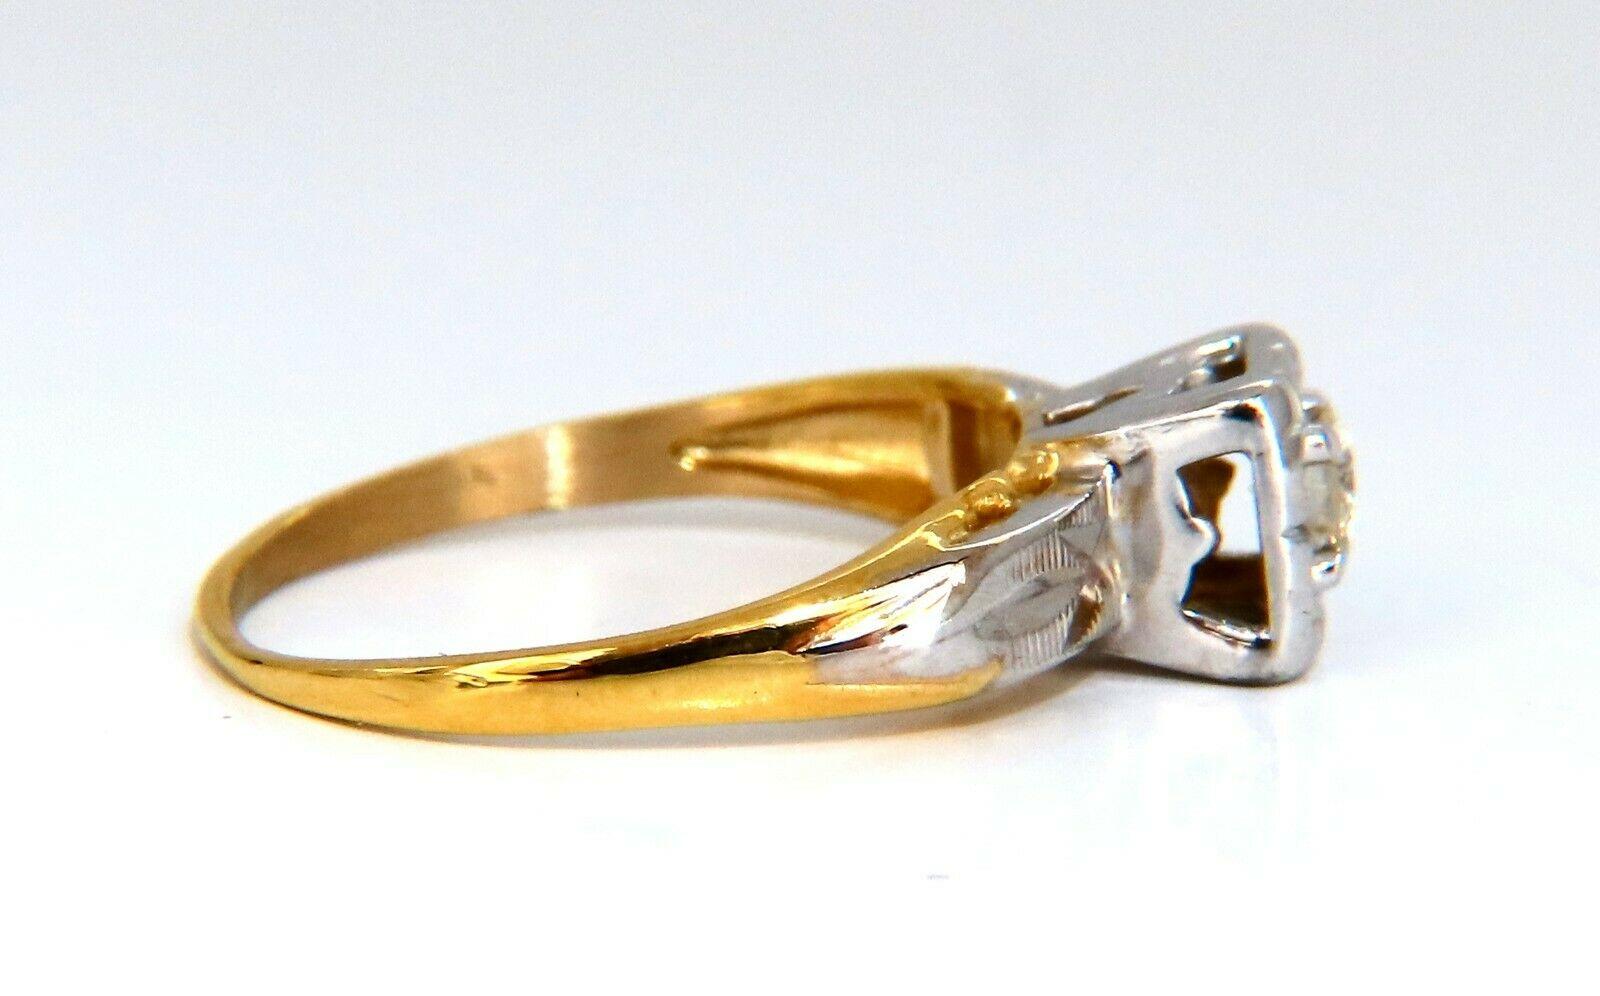 Rope Twist Cluster

.15ct Natural Round Cut Diamonds. 

Vs-2 clarity I color.

14kt yellow gold

1.9 Grams

Overall ring: 6.2mm 

Depth: 6.8mm

Current ring size: 5

May professionally resize, please inquire.